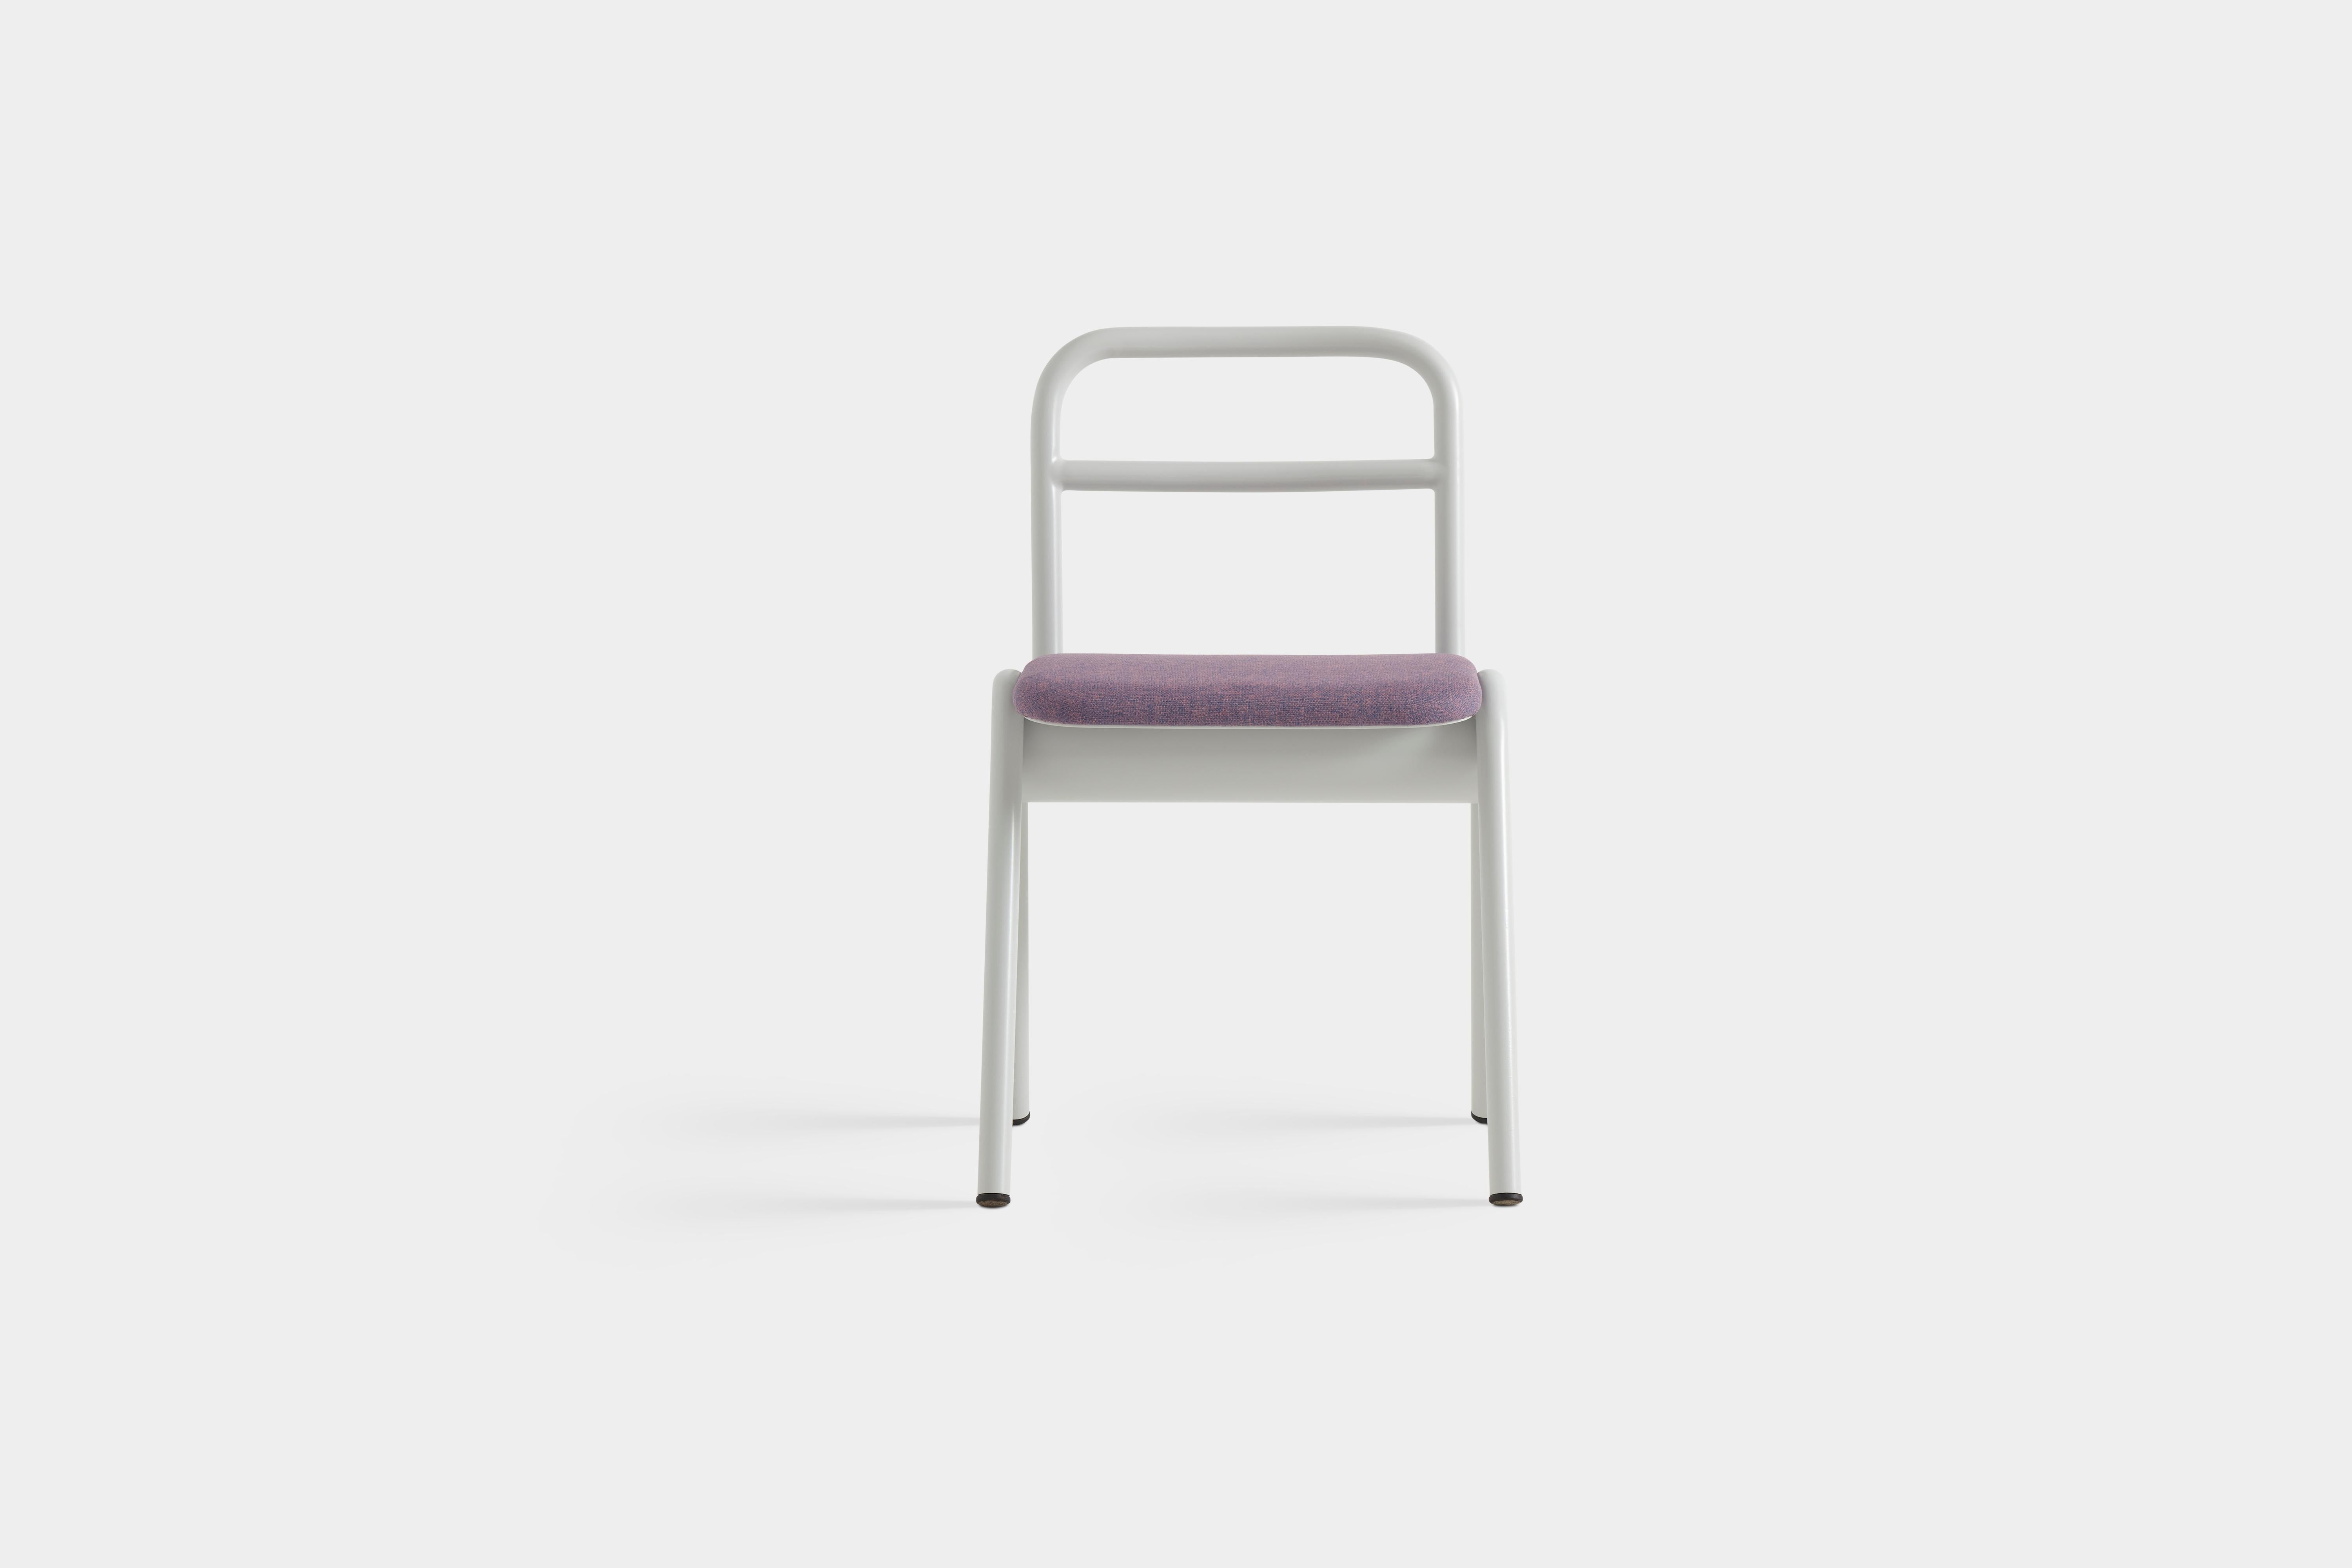 ZUM Chair by Pepe Albargues
Designed By Carlos Jiménez 
Dimensions: D 50 x W 49 x D 80 cm.
Materials: Aluminum, foam, plywood and upholstery.

Curved plywood seat. Aluminum structure lacquered any RAL colour. Foam CMHR (high resilience and flame